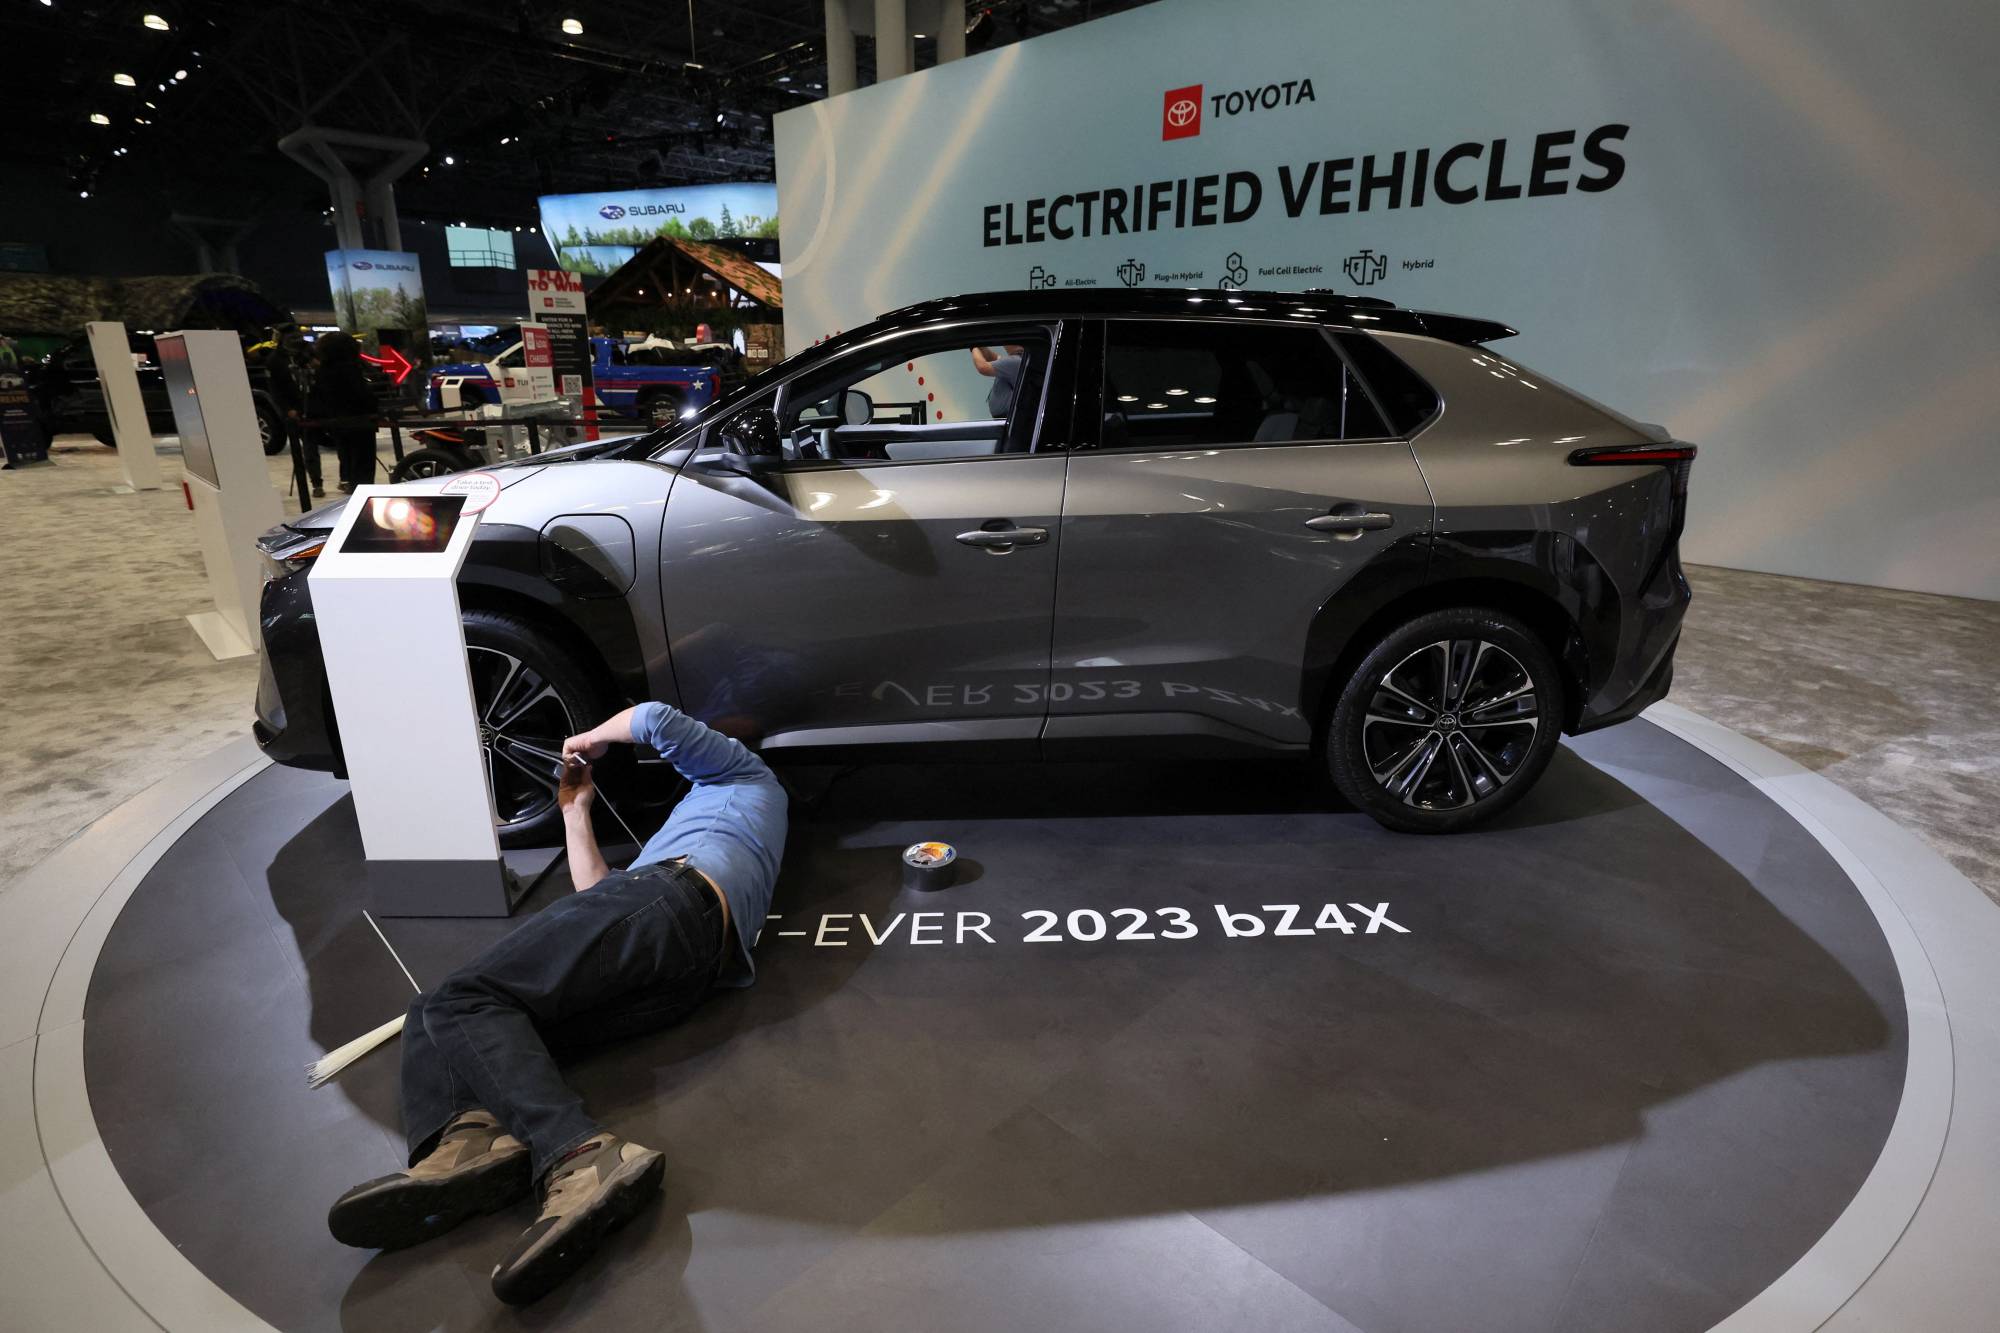 toyota-nearly-tapped-out-on-u-s-electric-vehicle-tax-credits-the